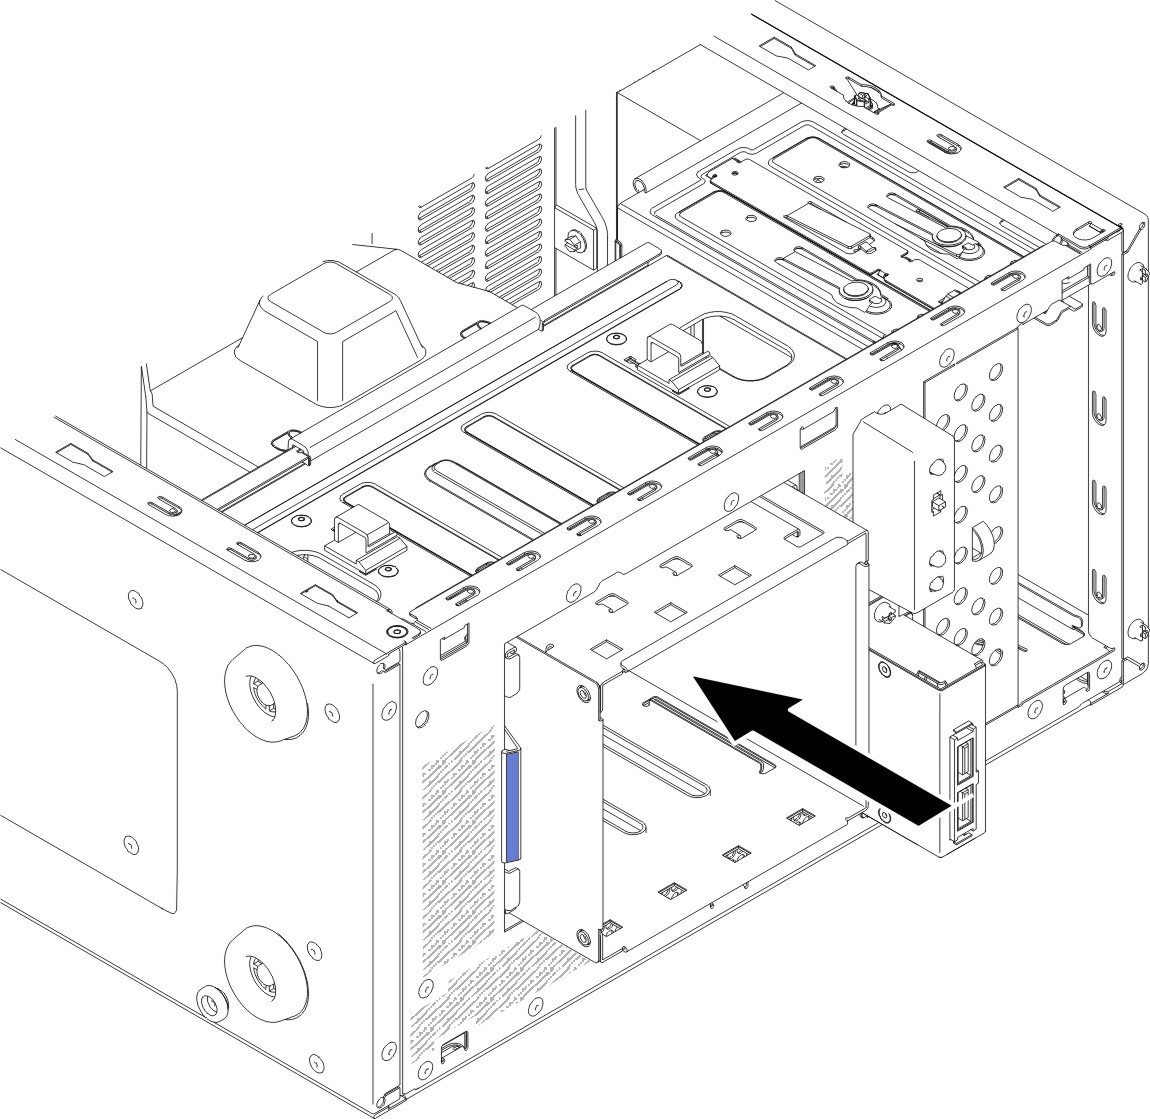 Hard disk drive cage installation for 4U server model with non-hot-swap power supplies